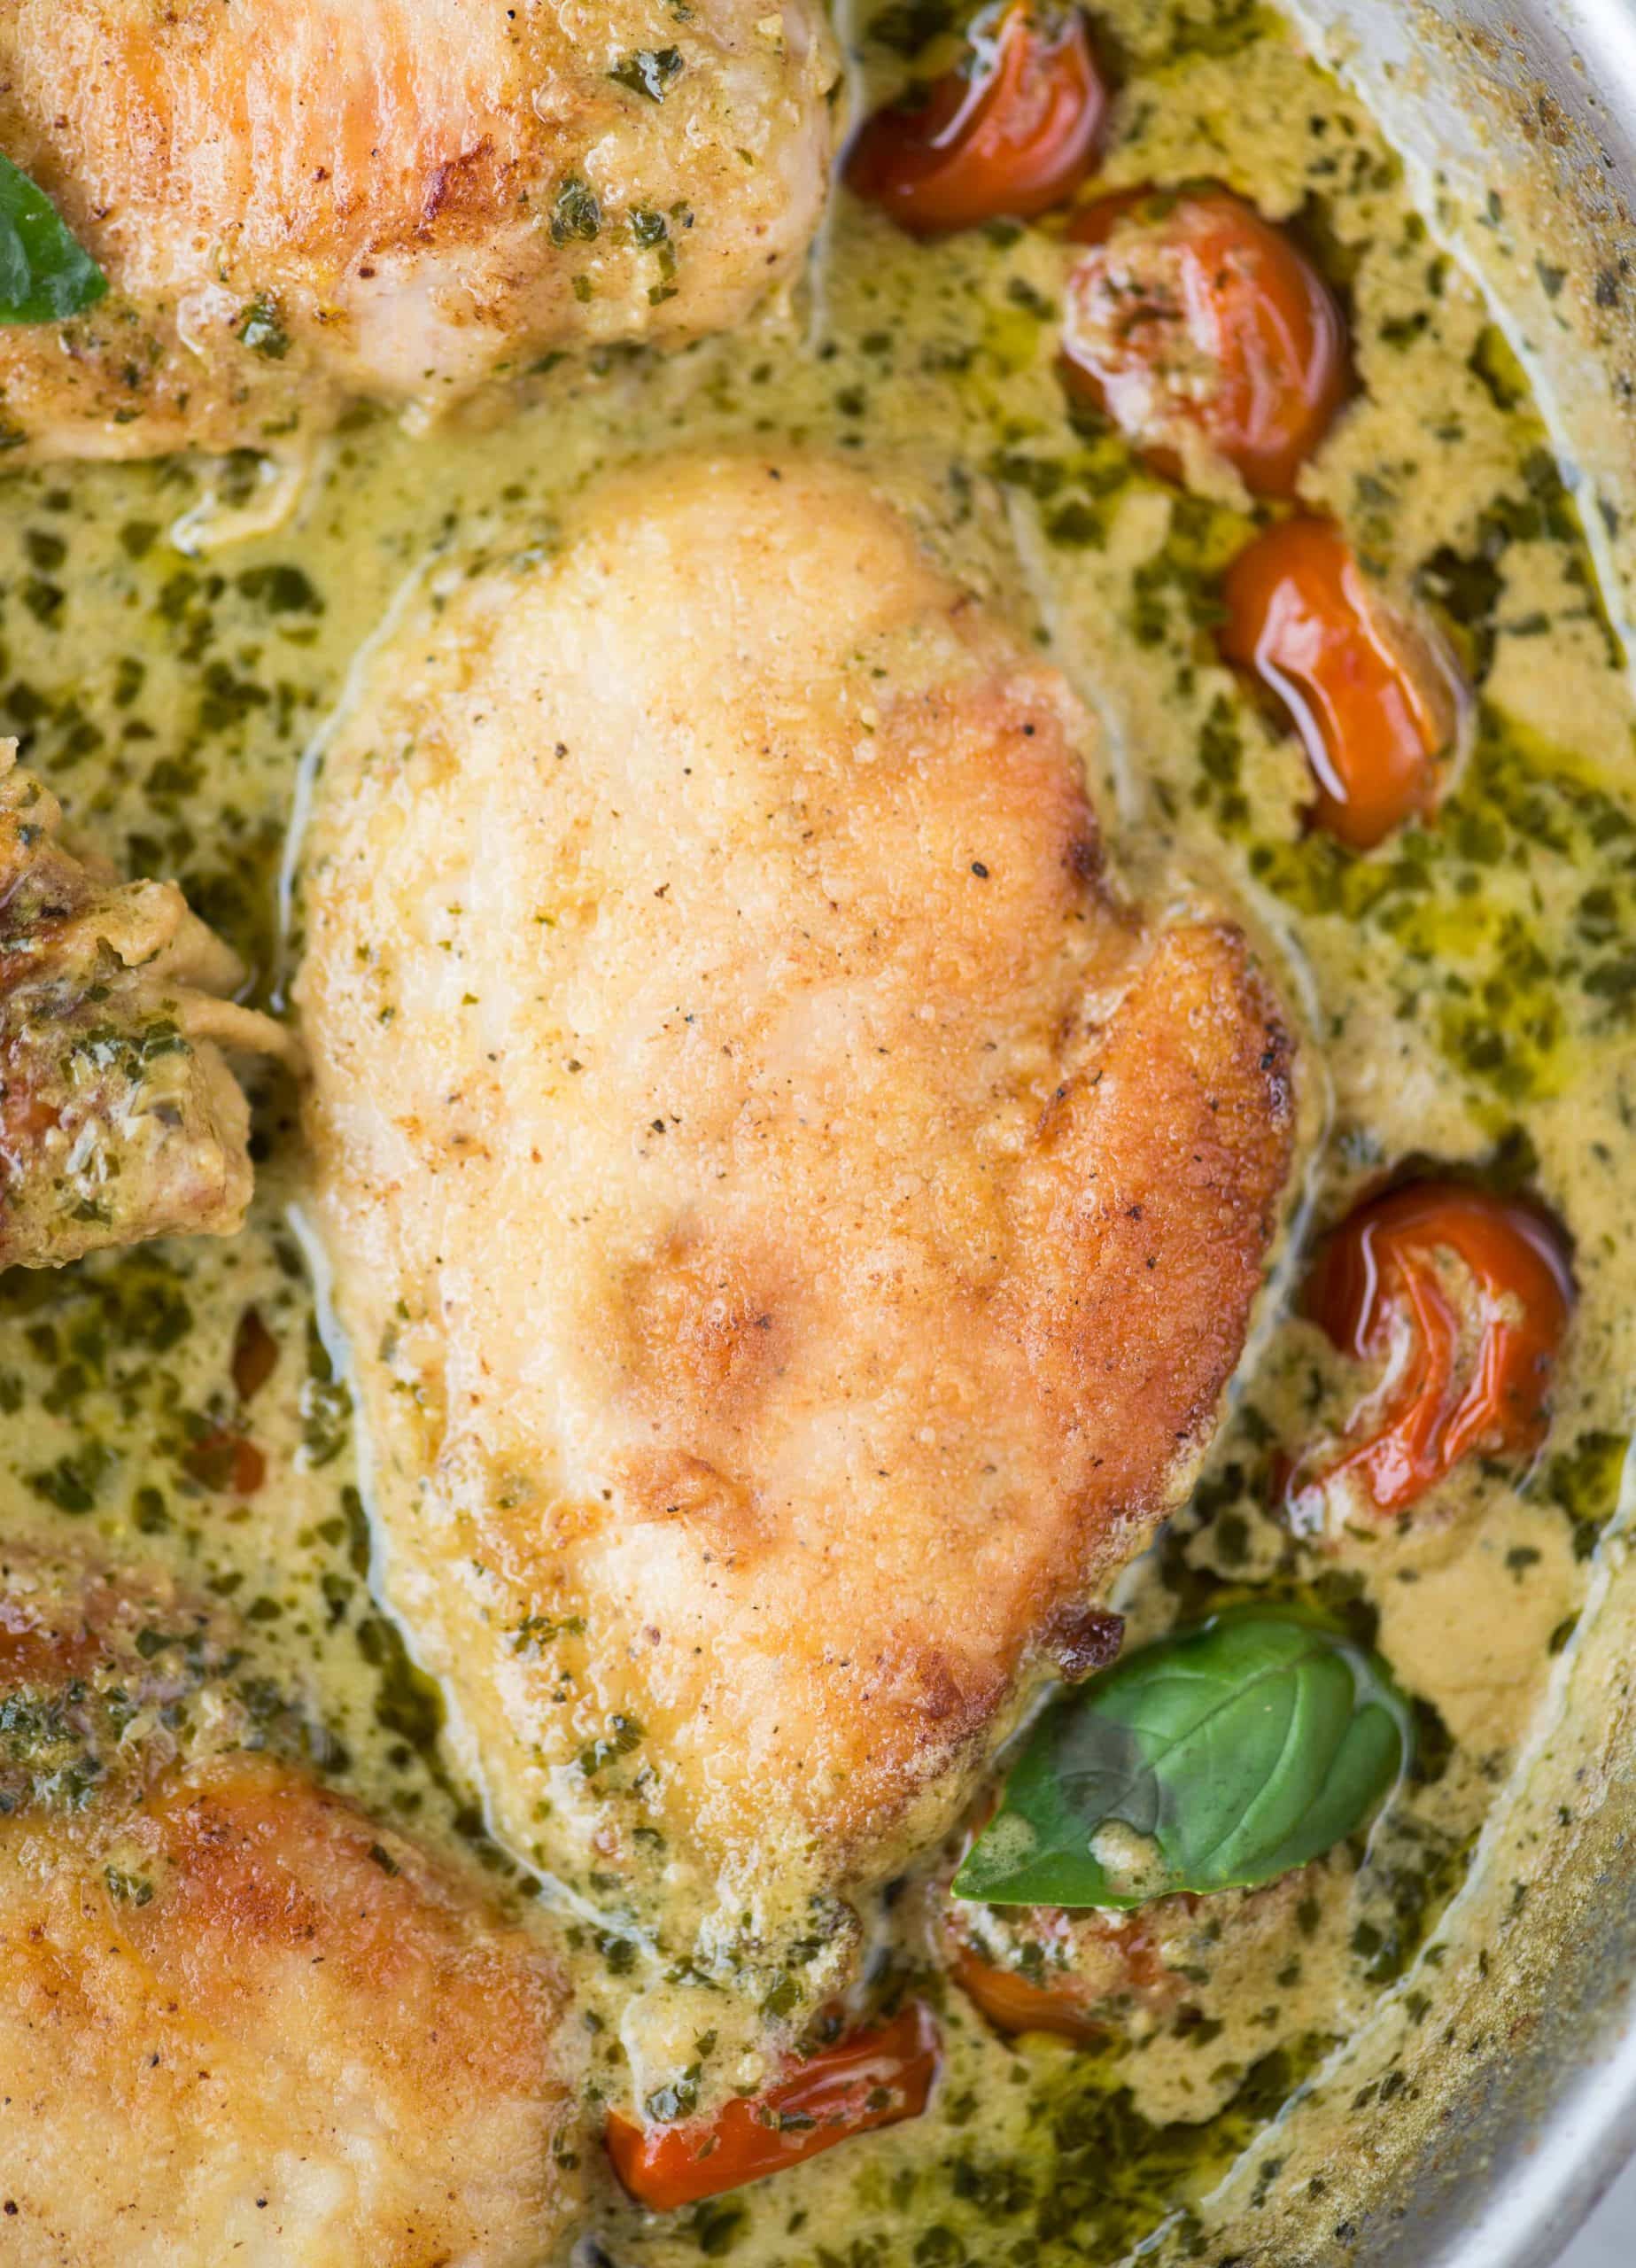 Pesto Chicken in a light and creamy sauce is packed with flavor that takes less than 30 minutes to make. Toss some pasta in the sauce and a delicious dinner is on the table in no time. 